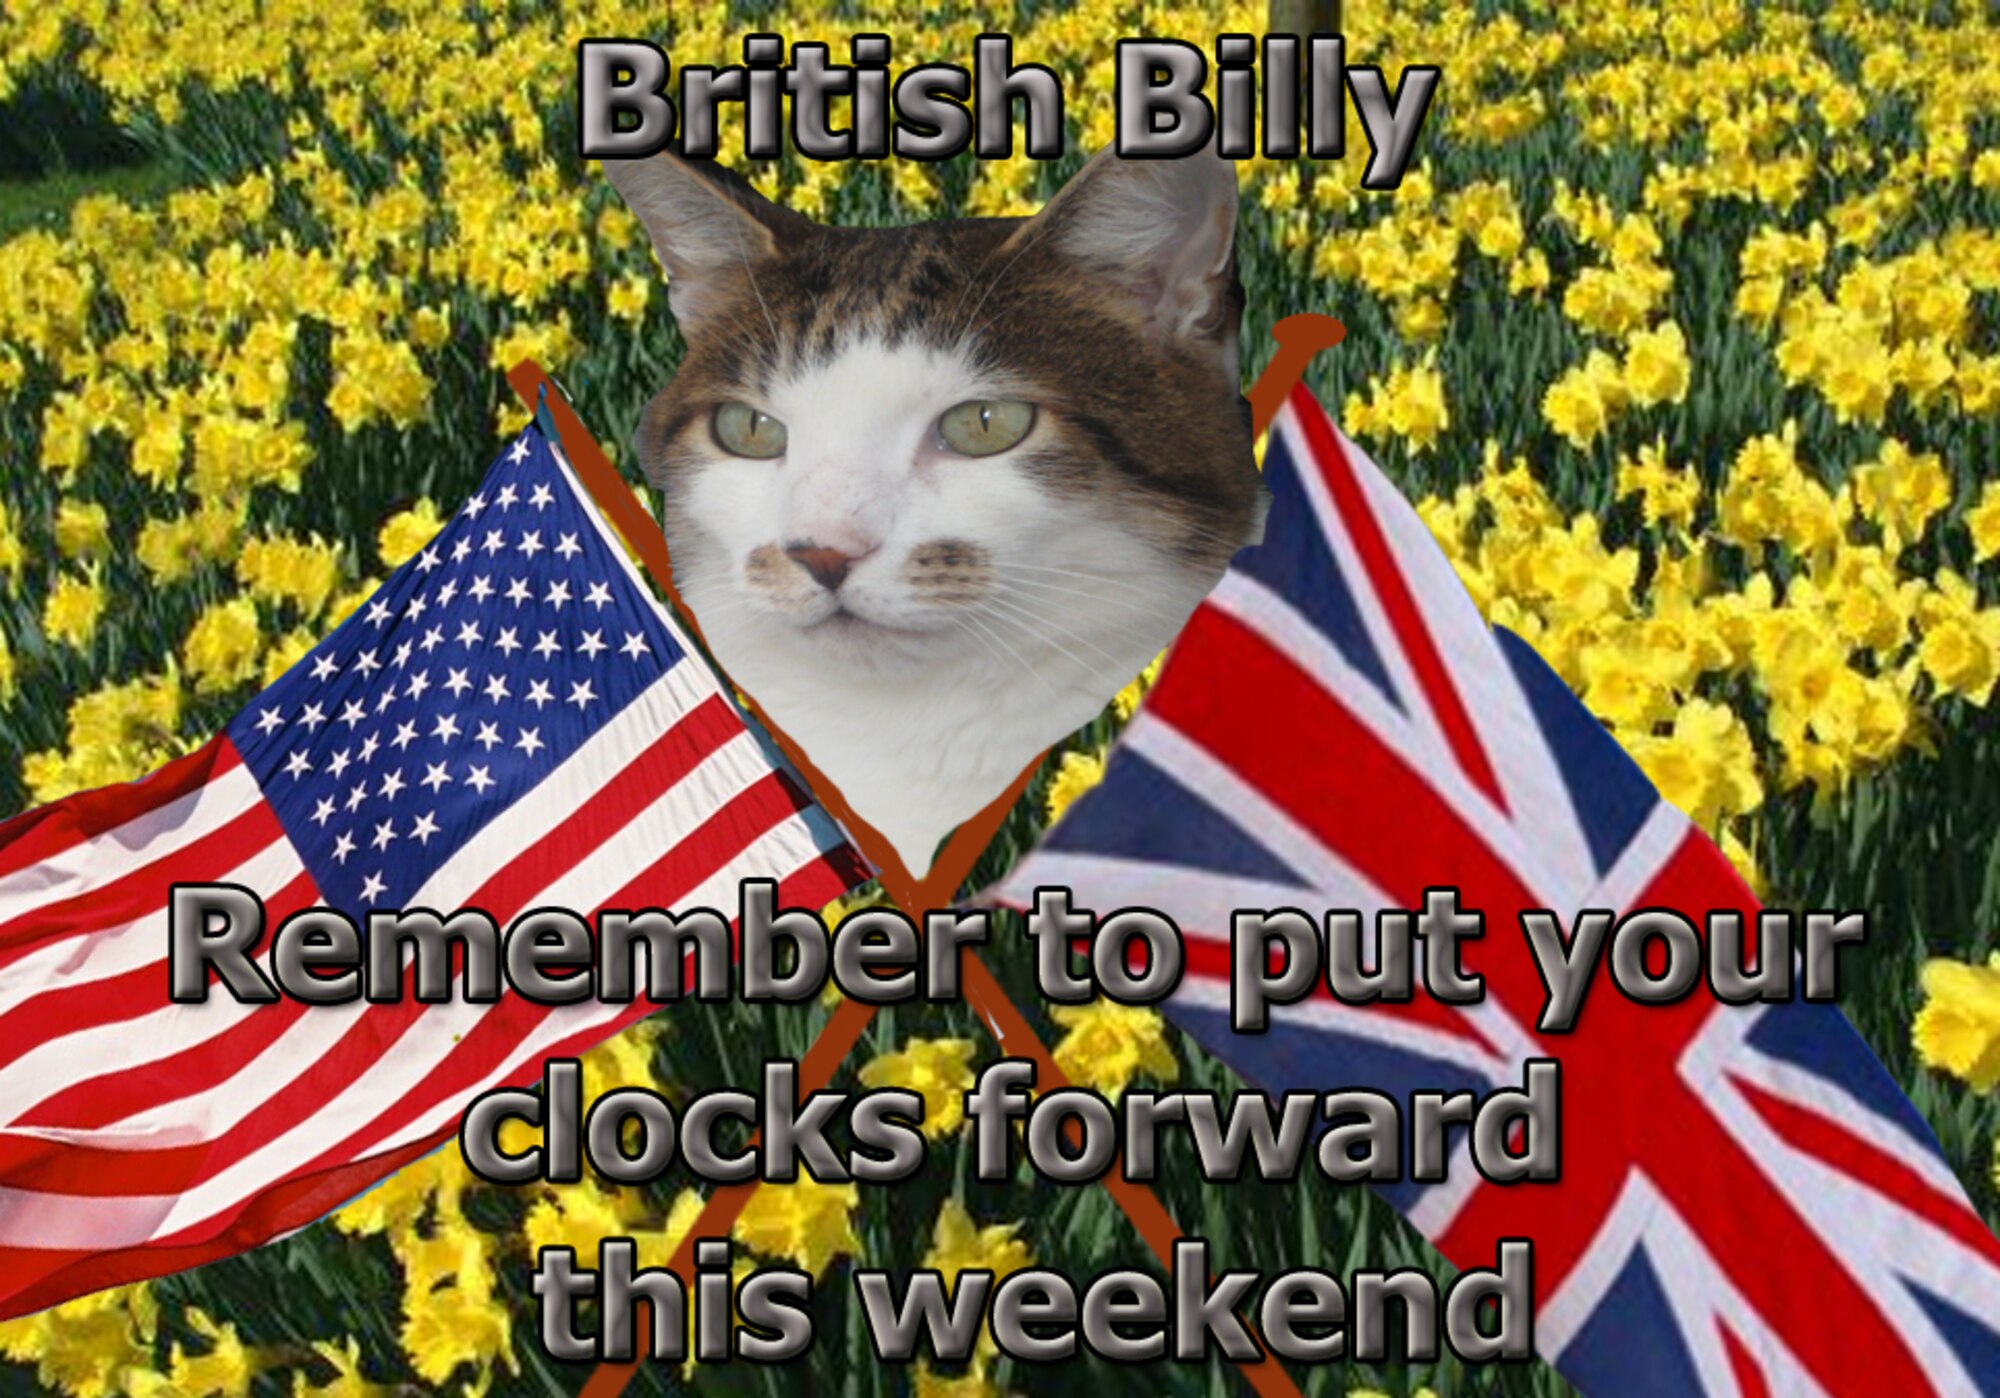 In all the excitement, don't forget to set your clocks forward by one hour March 27, officially the start of British Summer Time. We may be losing an hour, but with extra daylight in the evenings and a long summer ahead, there's plenty to look forward to after the clocks change. Ask Billy about the things puzzling about life and culture in the U.K., and if he doesn't know the answer, he has ways and means of finding out. Feel free to send him any questions, and when he isn't sleeping or hunting, he'll try and put a few thoughts together to help you out.